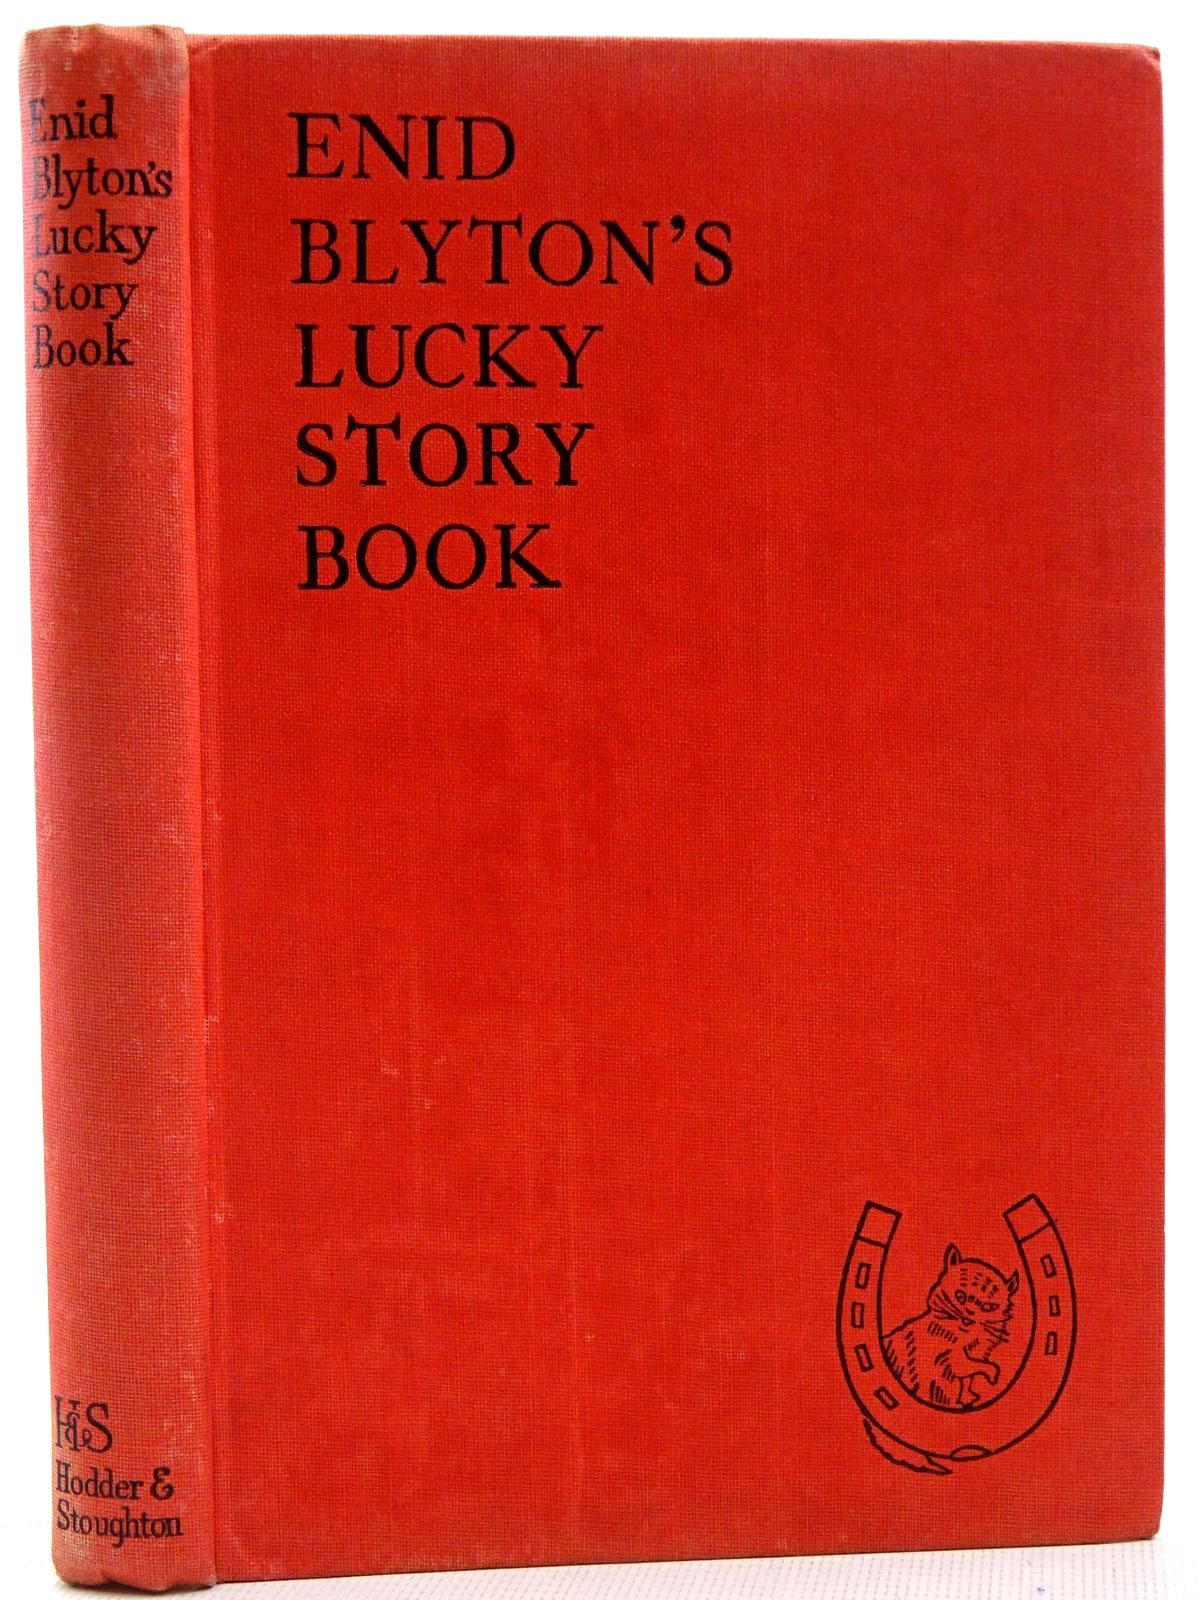 Photo of ENID BLYTON'S LUCKY STORY BOOK written by Blyton, Enid illustrated by Soper, Eileen published by Hodder & Stoughton (STOCK CODE: 2128667)  for sale by Stella & Rose's Books